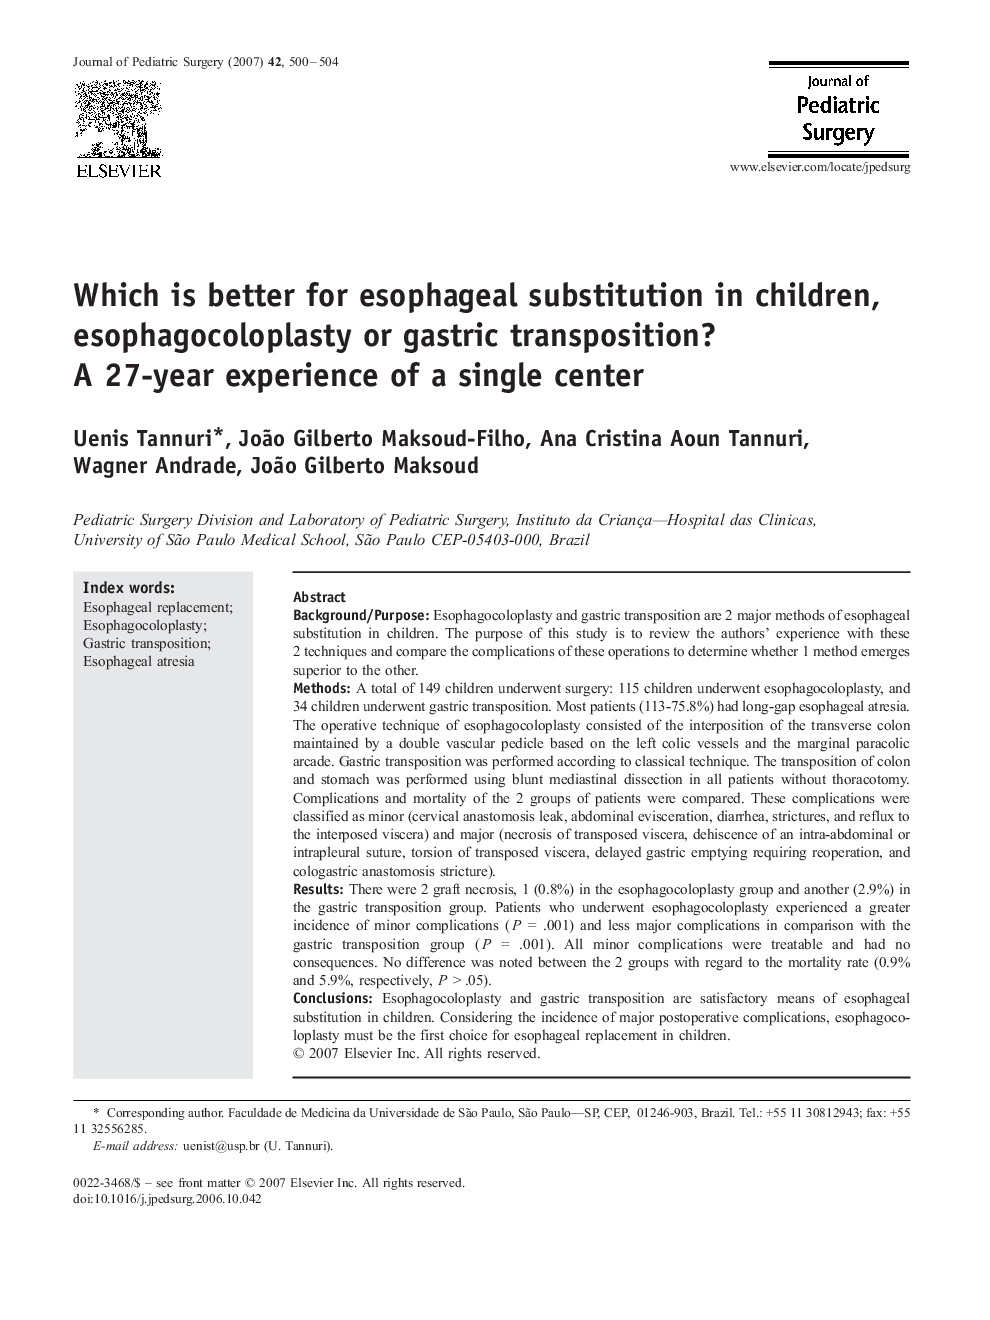 Which is better for esophageal substitution in children, esophagocoloplasty or gastric transposition? A 27-year experience of a single center